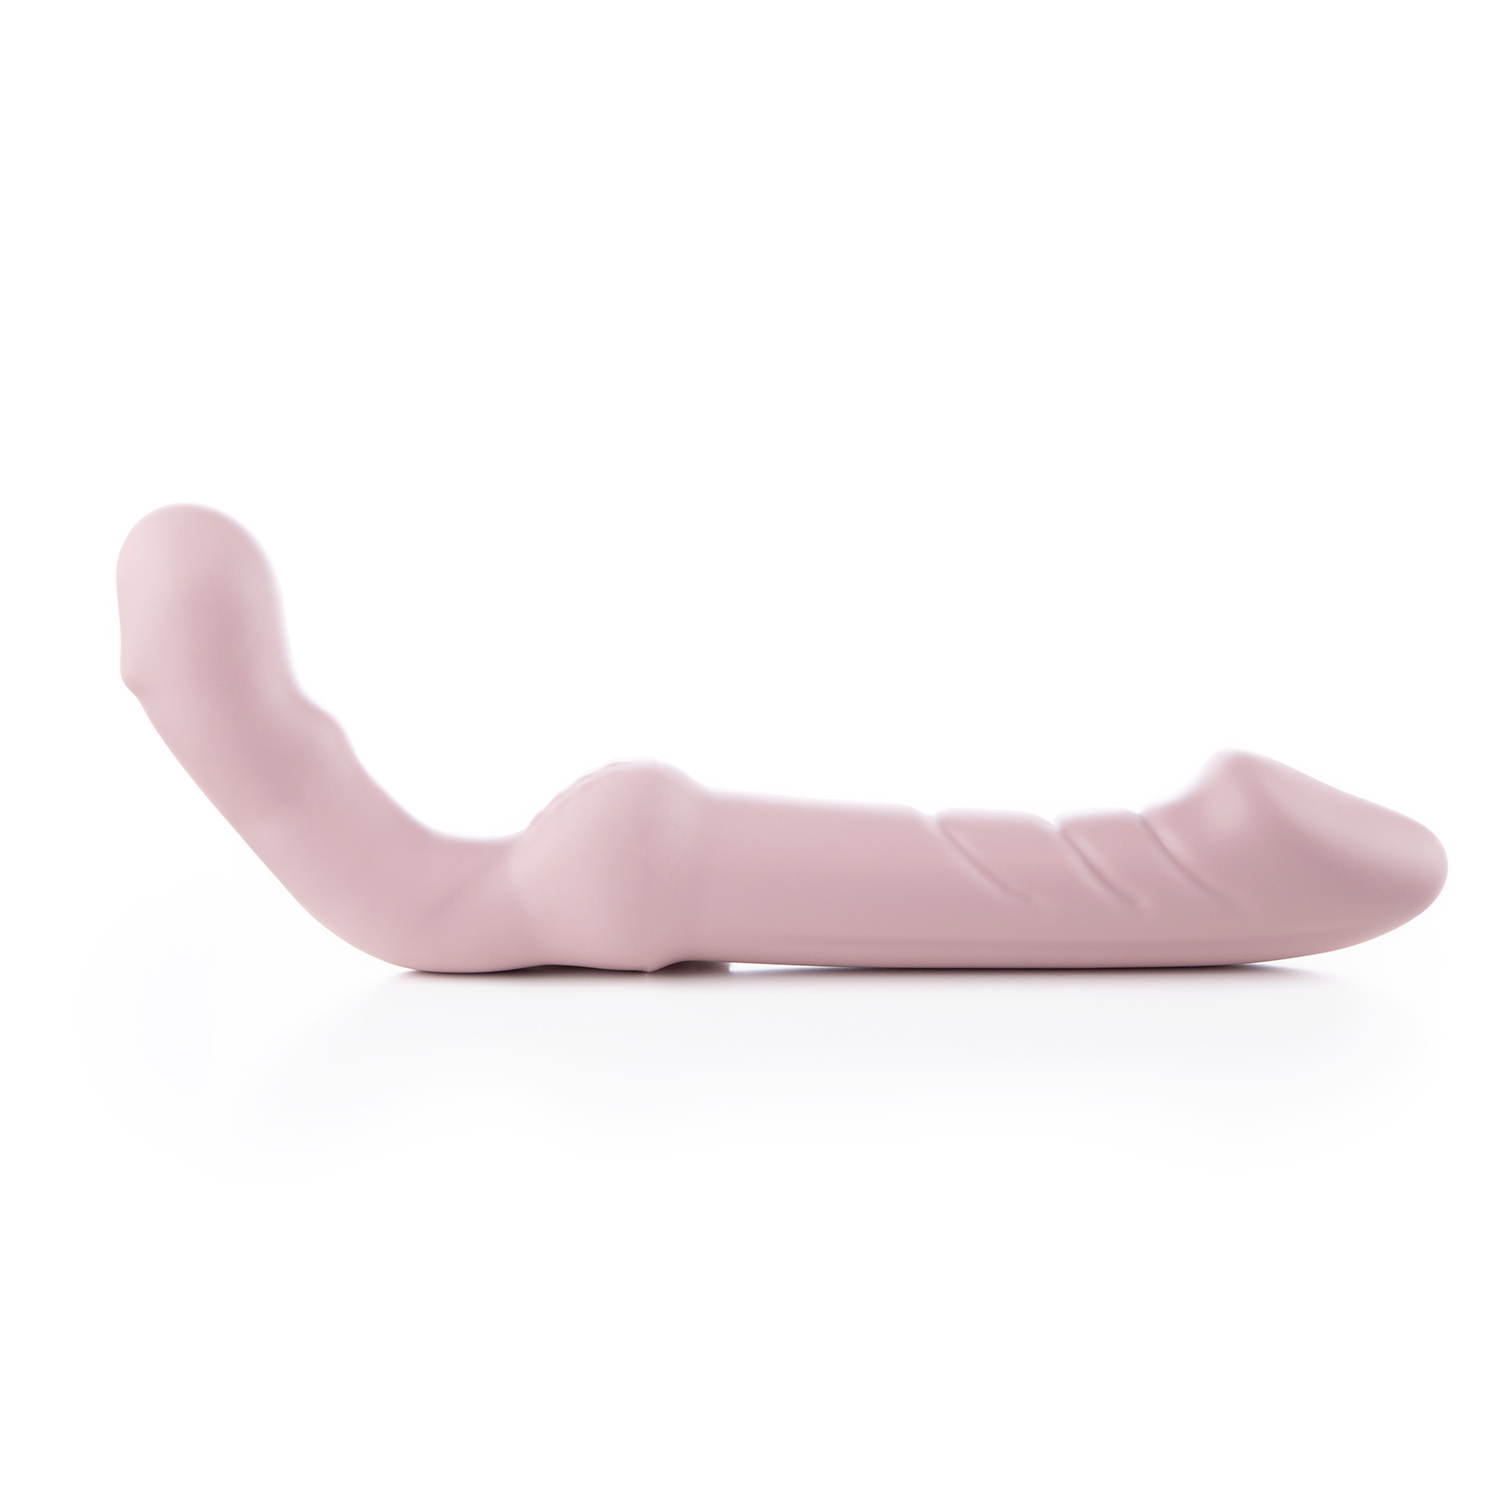 DEVOTION DOUBLE-ENDED STRAP-ON DILDO IN PINK